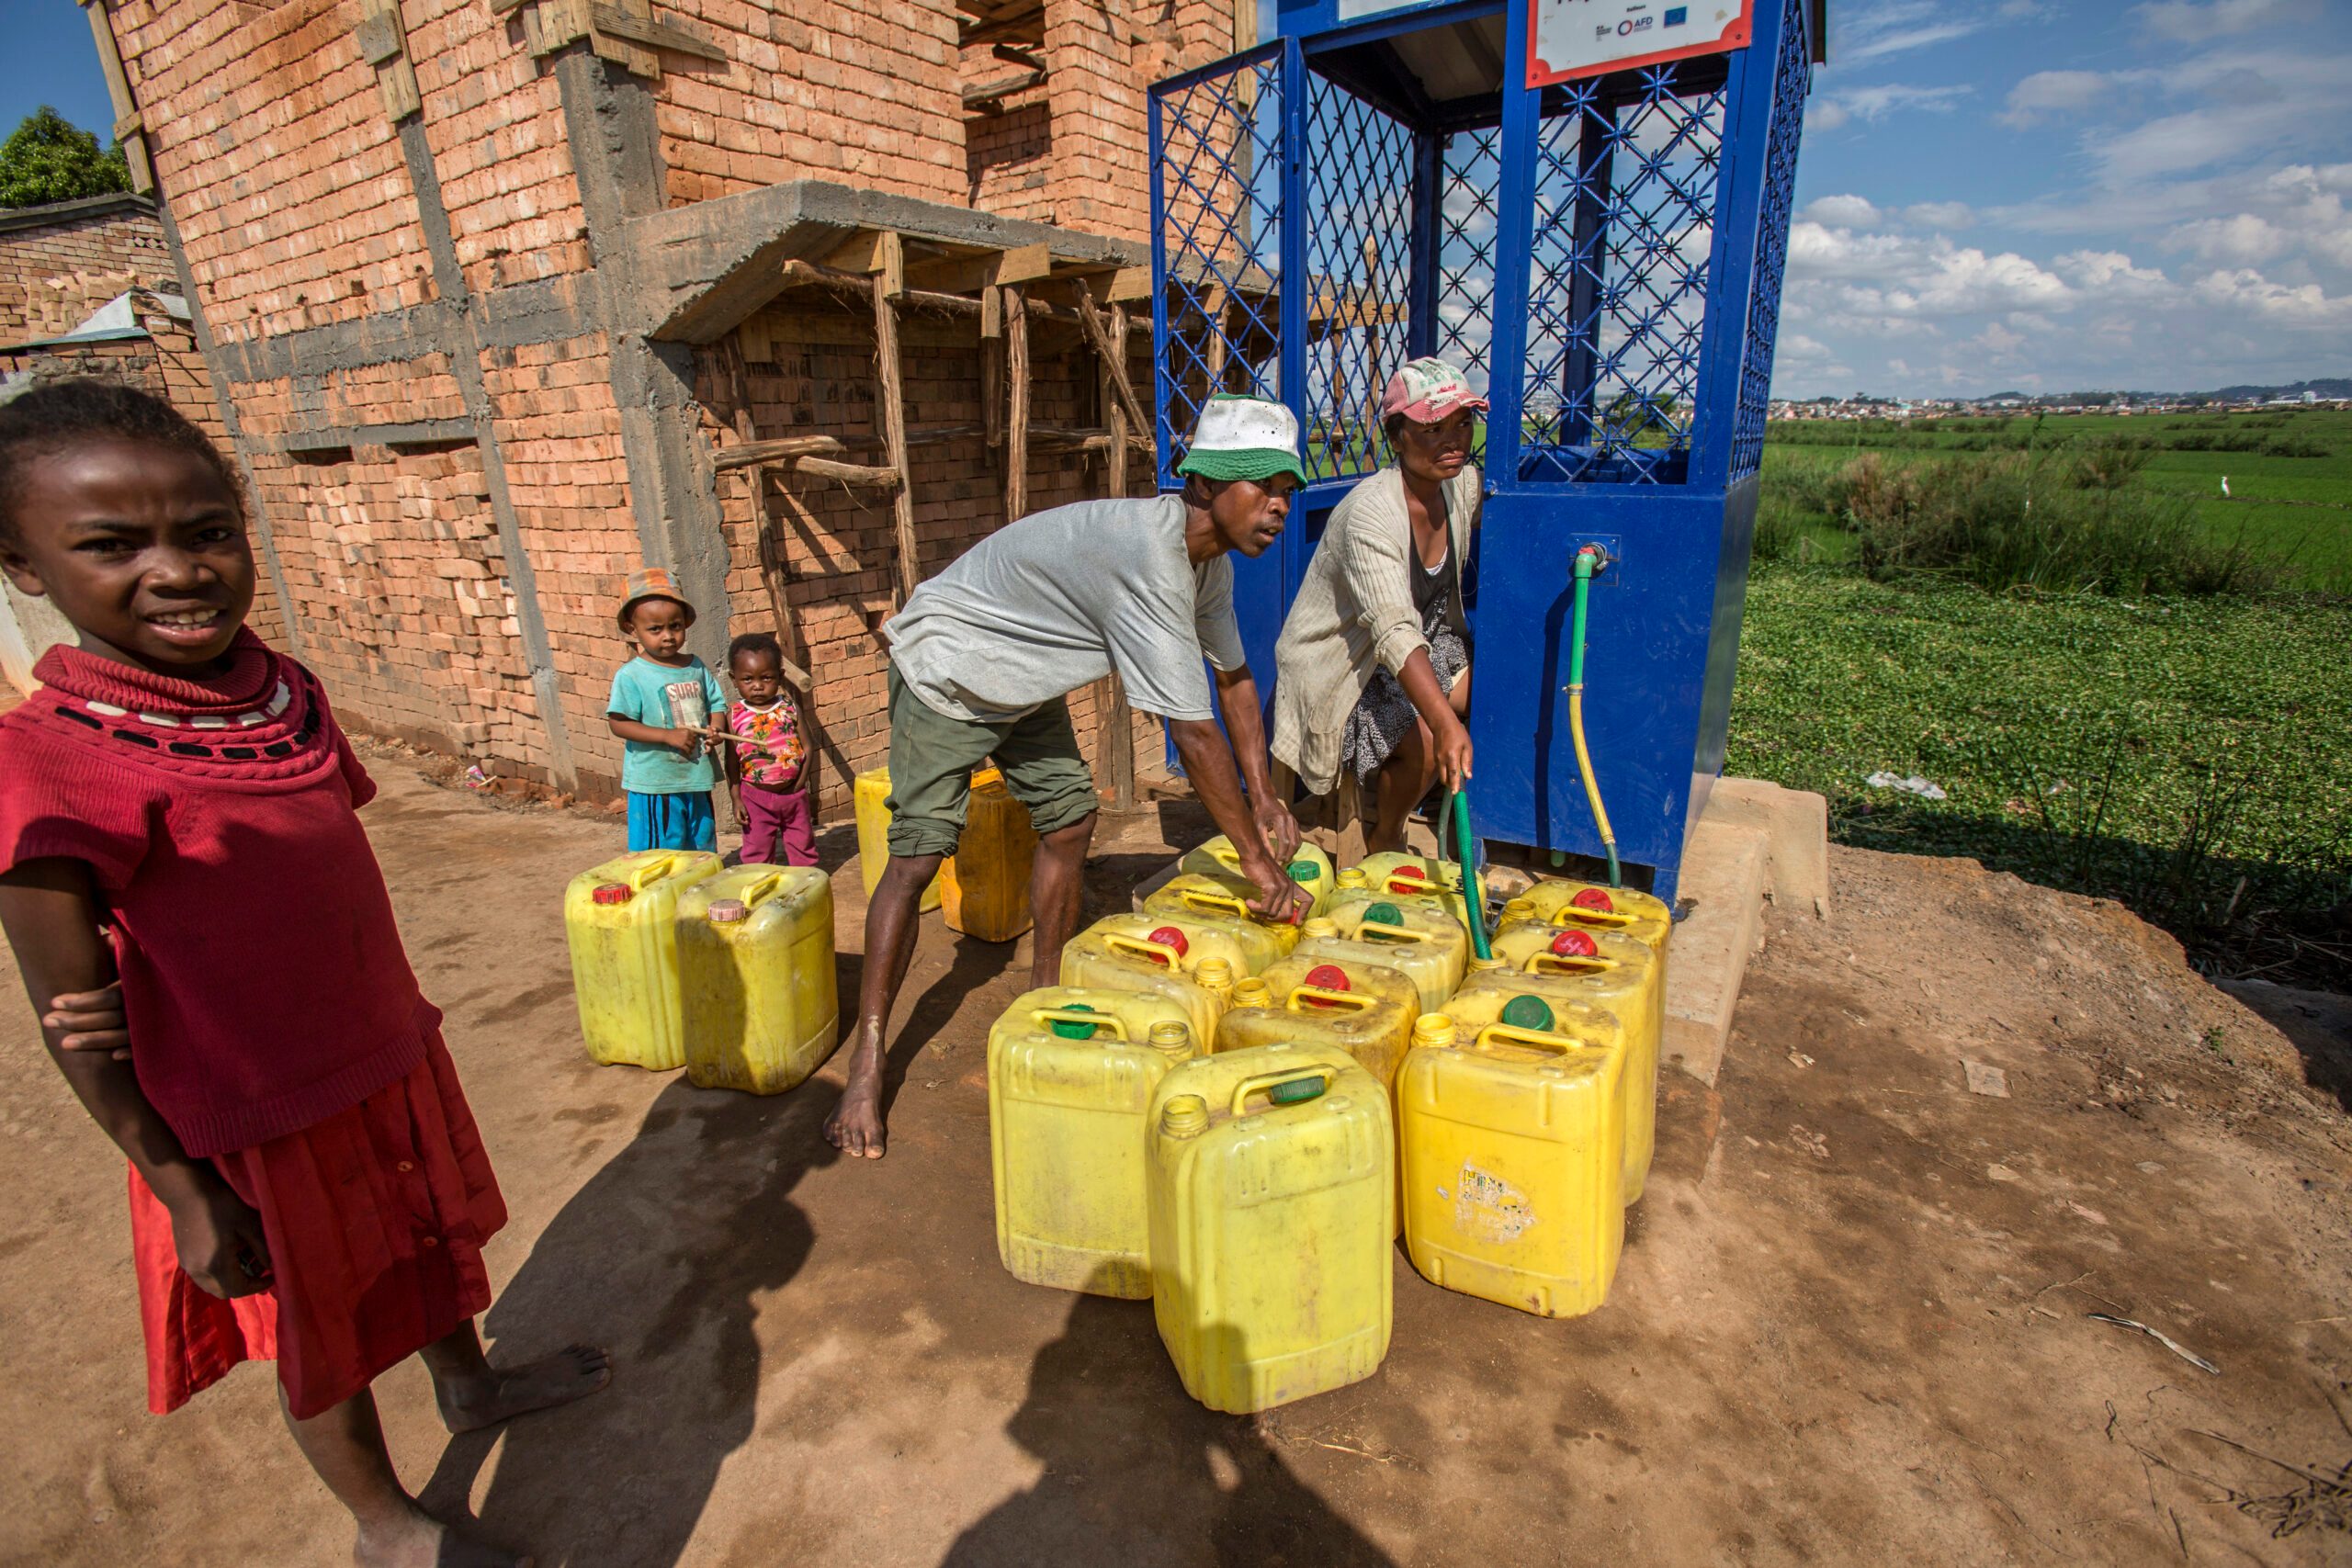 Villagers collect drinking water in Antananarivo, Madagascar. The region is facing drinking water shortages due to both drought and floods